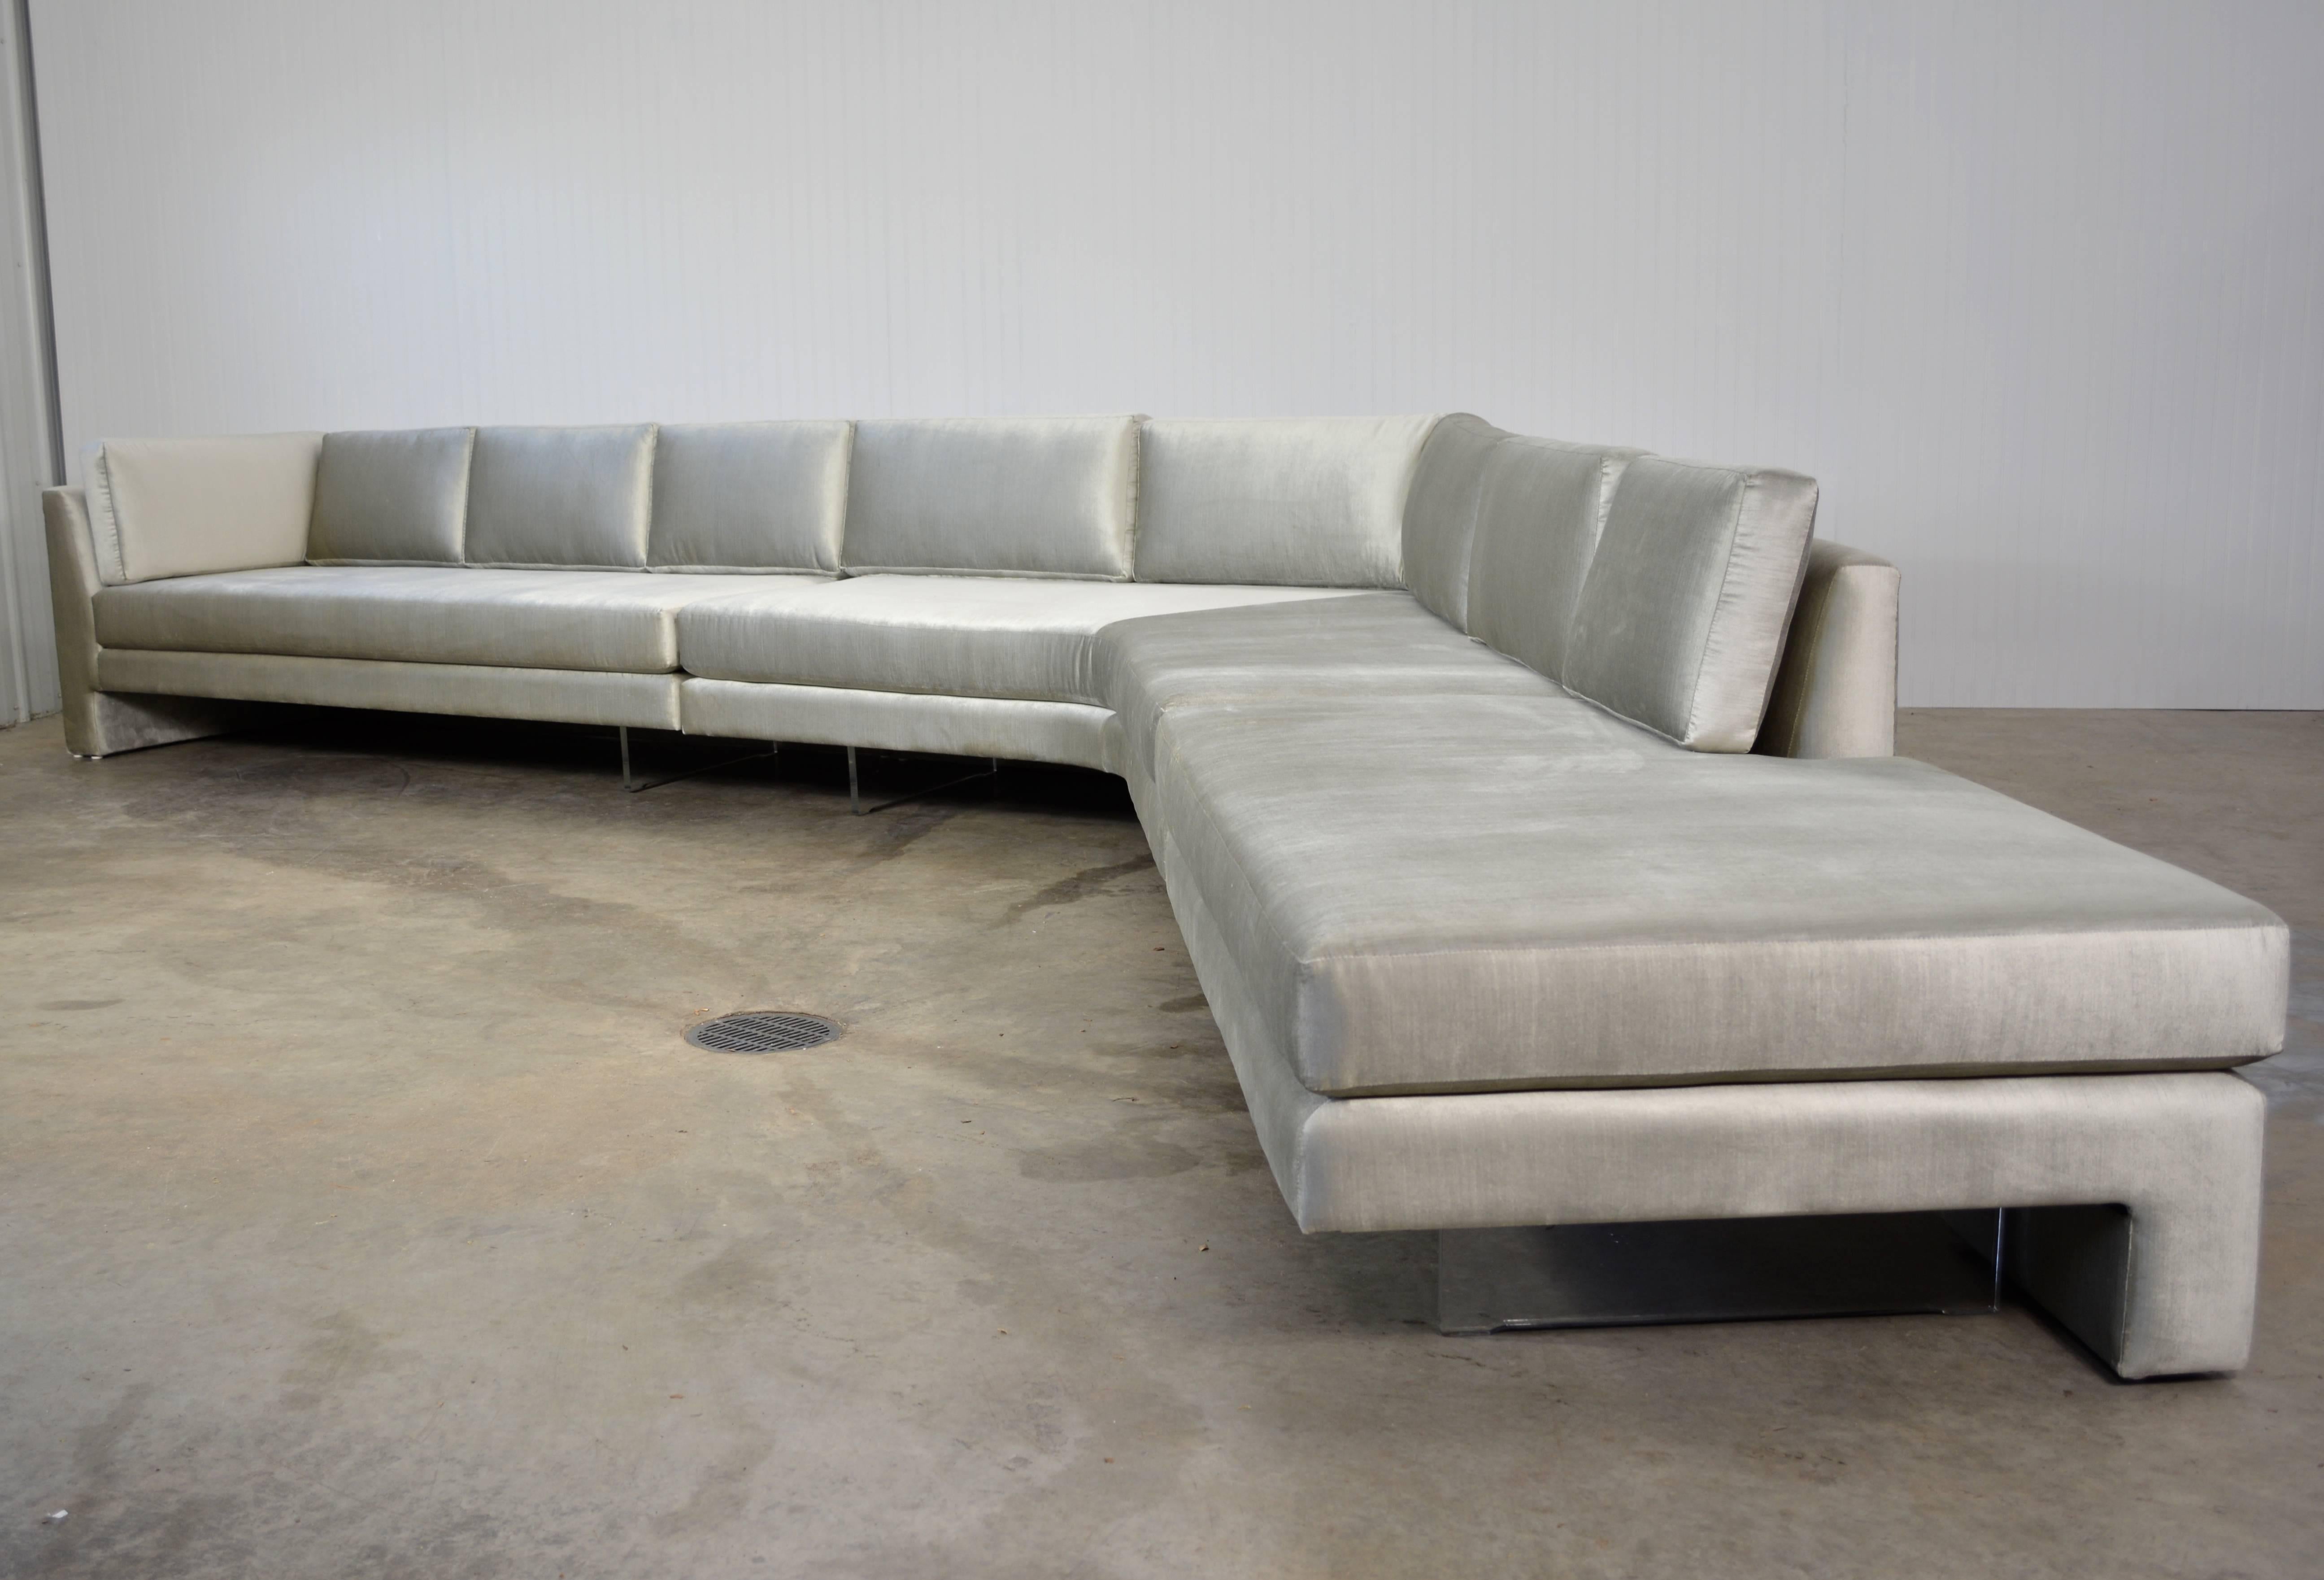 A large three-piece omnibus sectional by Vladimir Kagan for Vladimir Kagan designs. Newly recovered in grey/silver velvet over Lucite support plates.

Each section measures:

79" W x 35.5" D x 31" H
The corner section is 60"